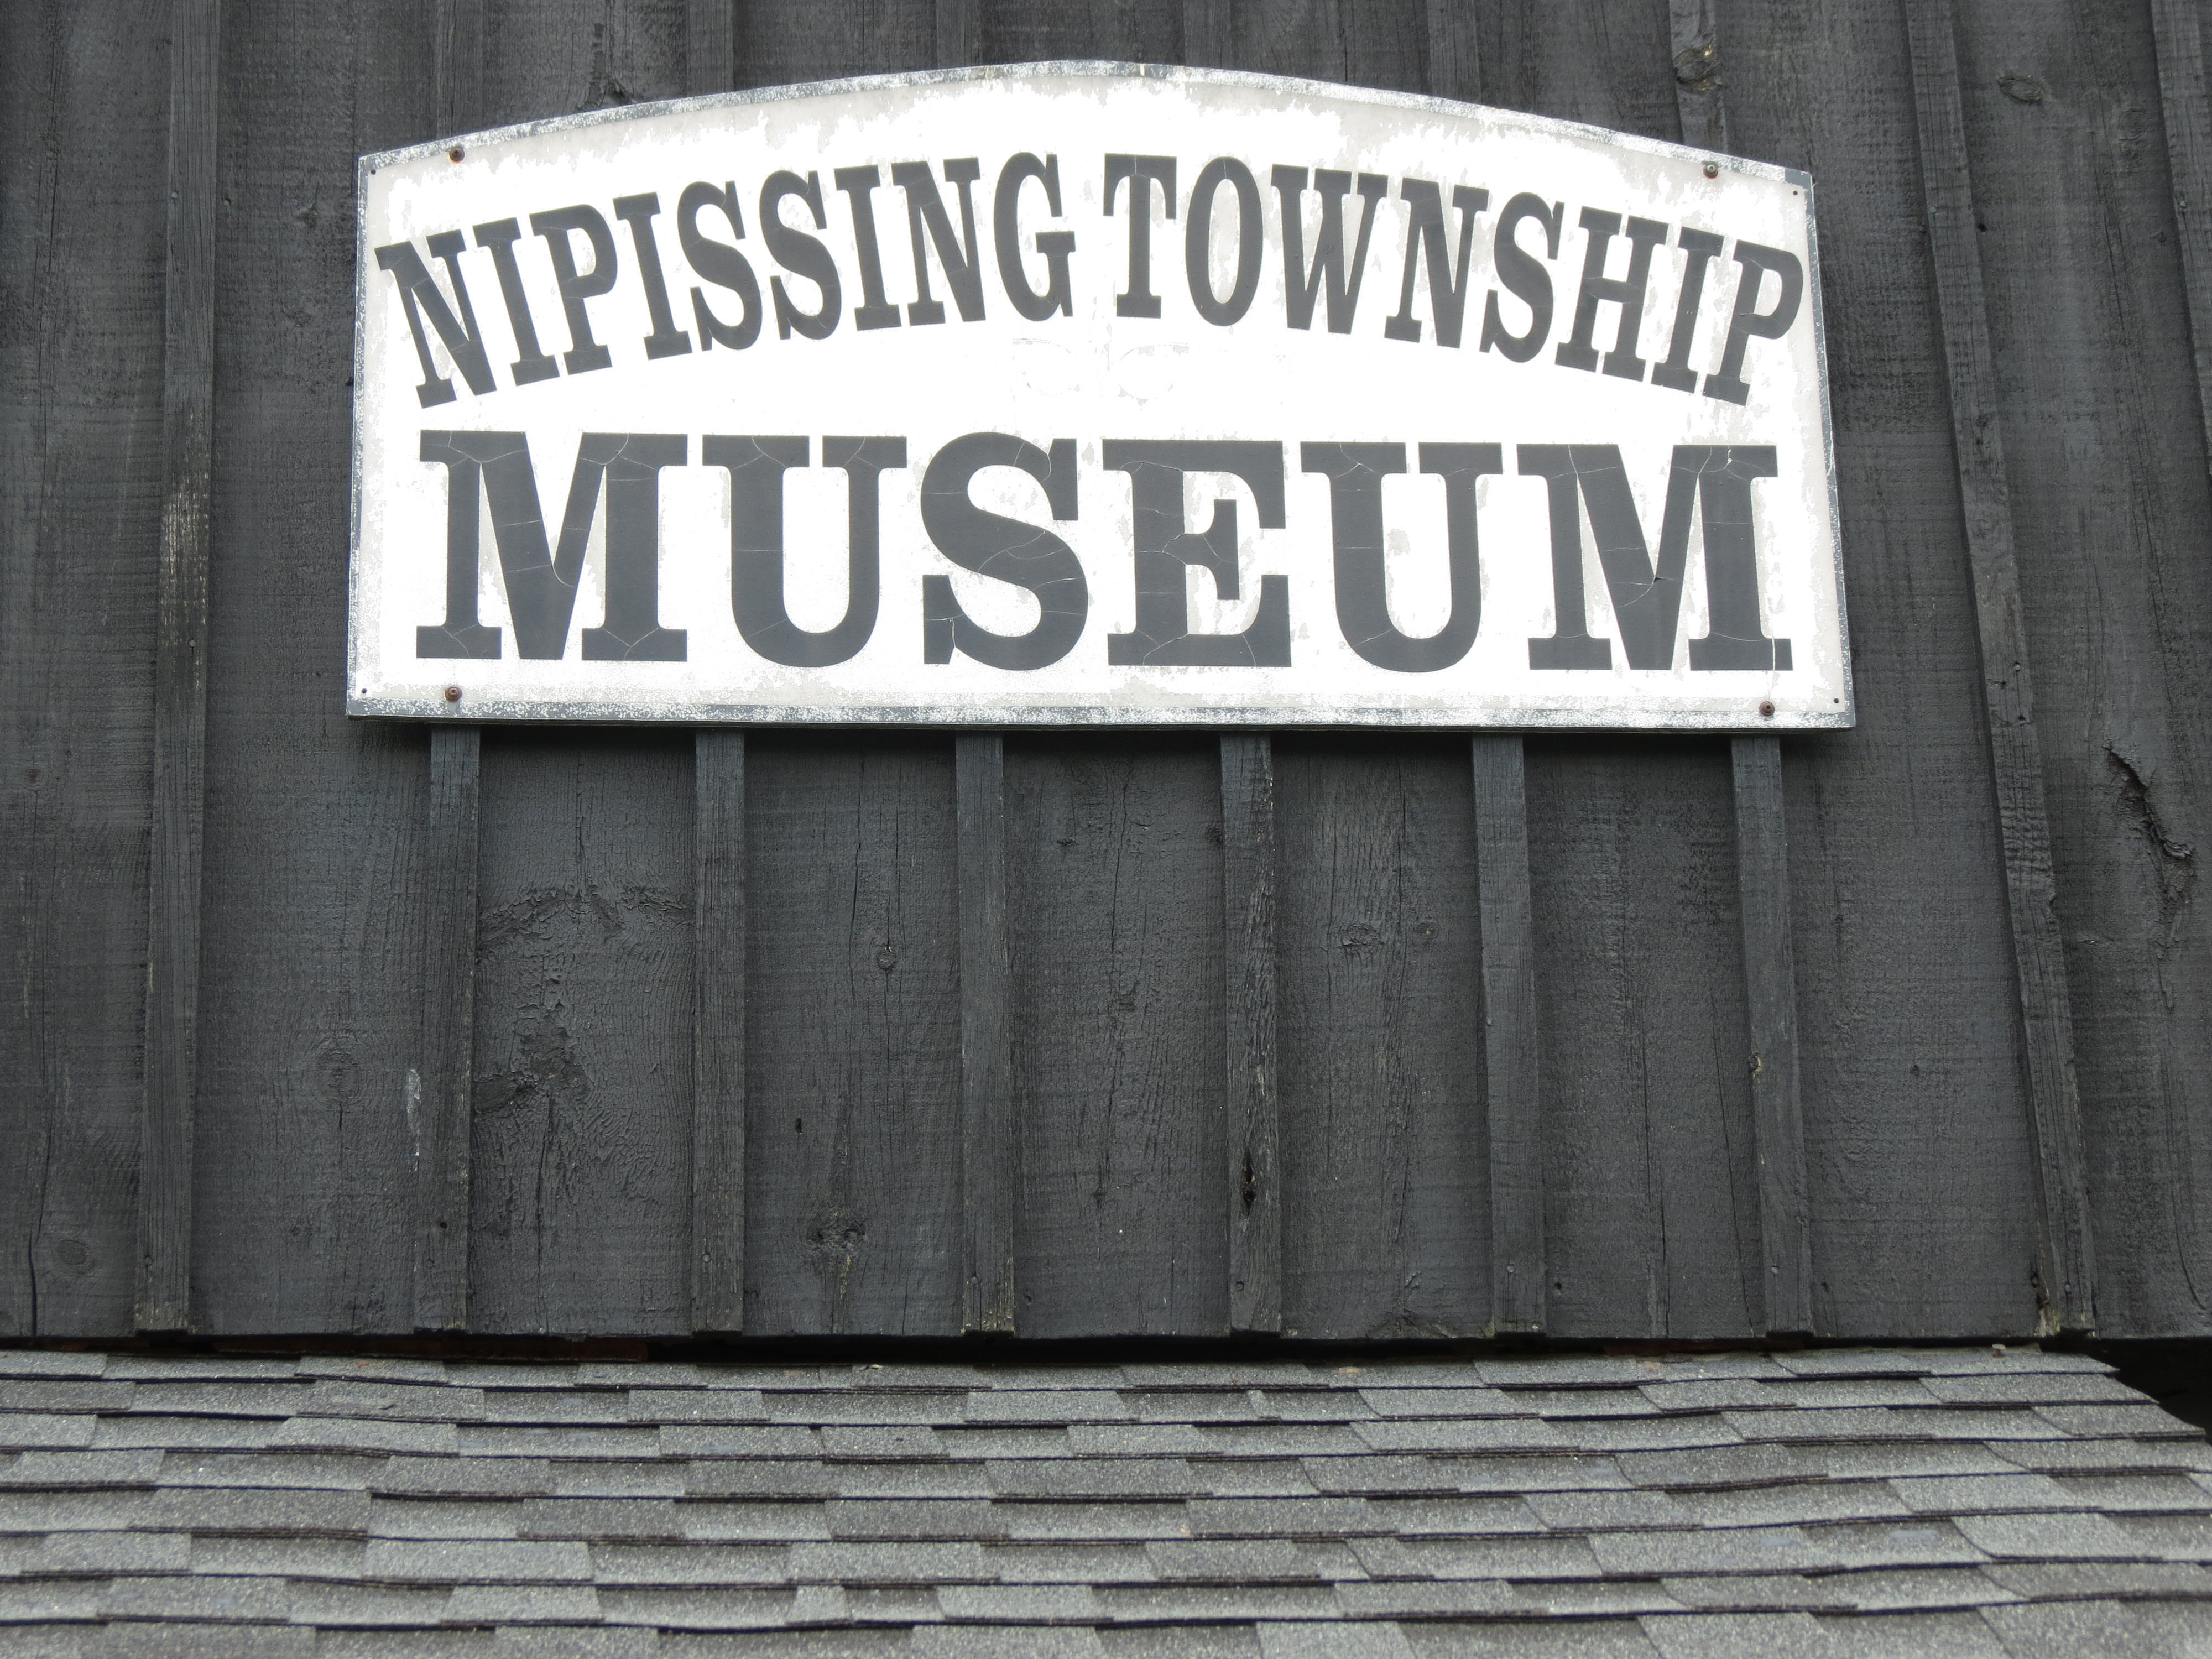 A grey and white sign above a grey shingled roof that reads "Nipissing Township Museum".